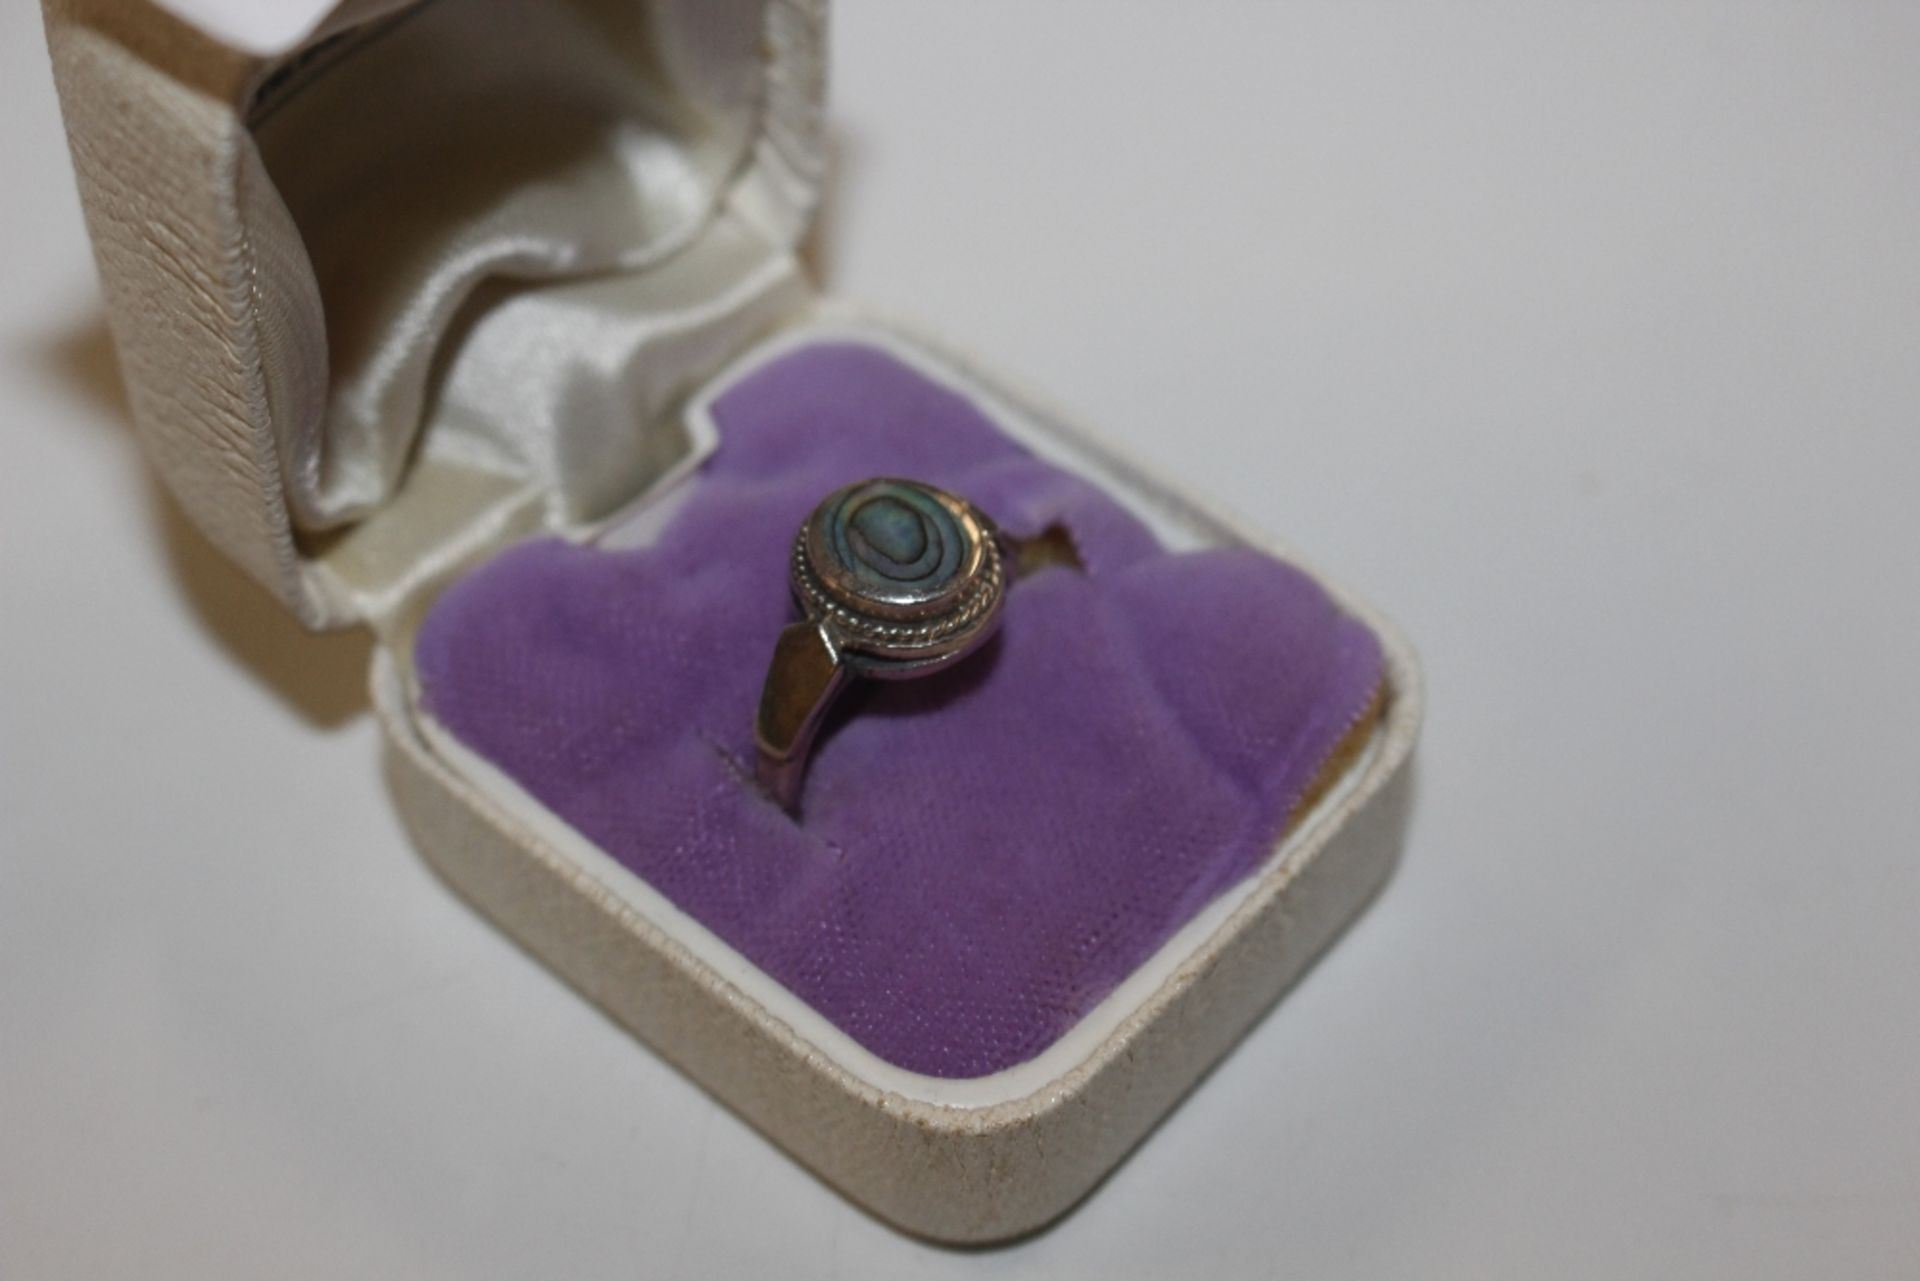 A 925 and abalone shell mounted ring